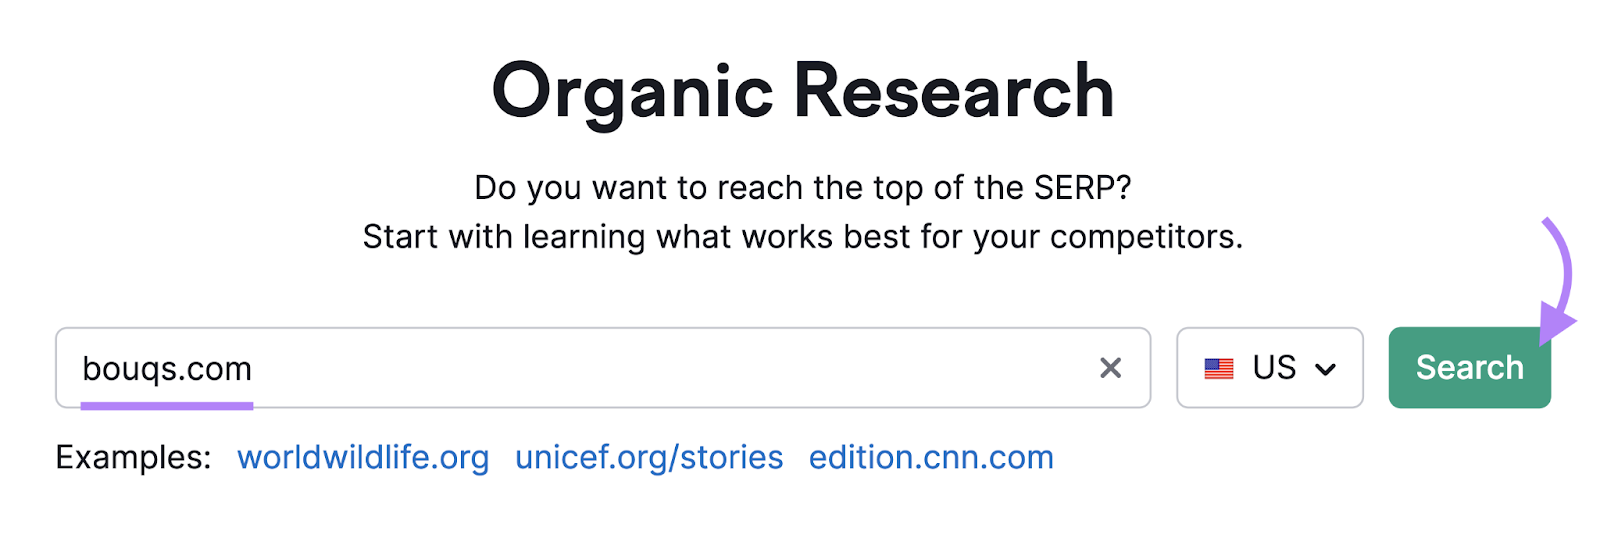 "bouqs.com" entered into the Organic Research tool search